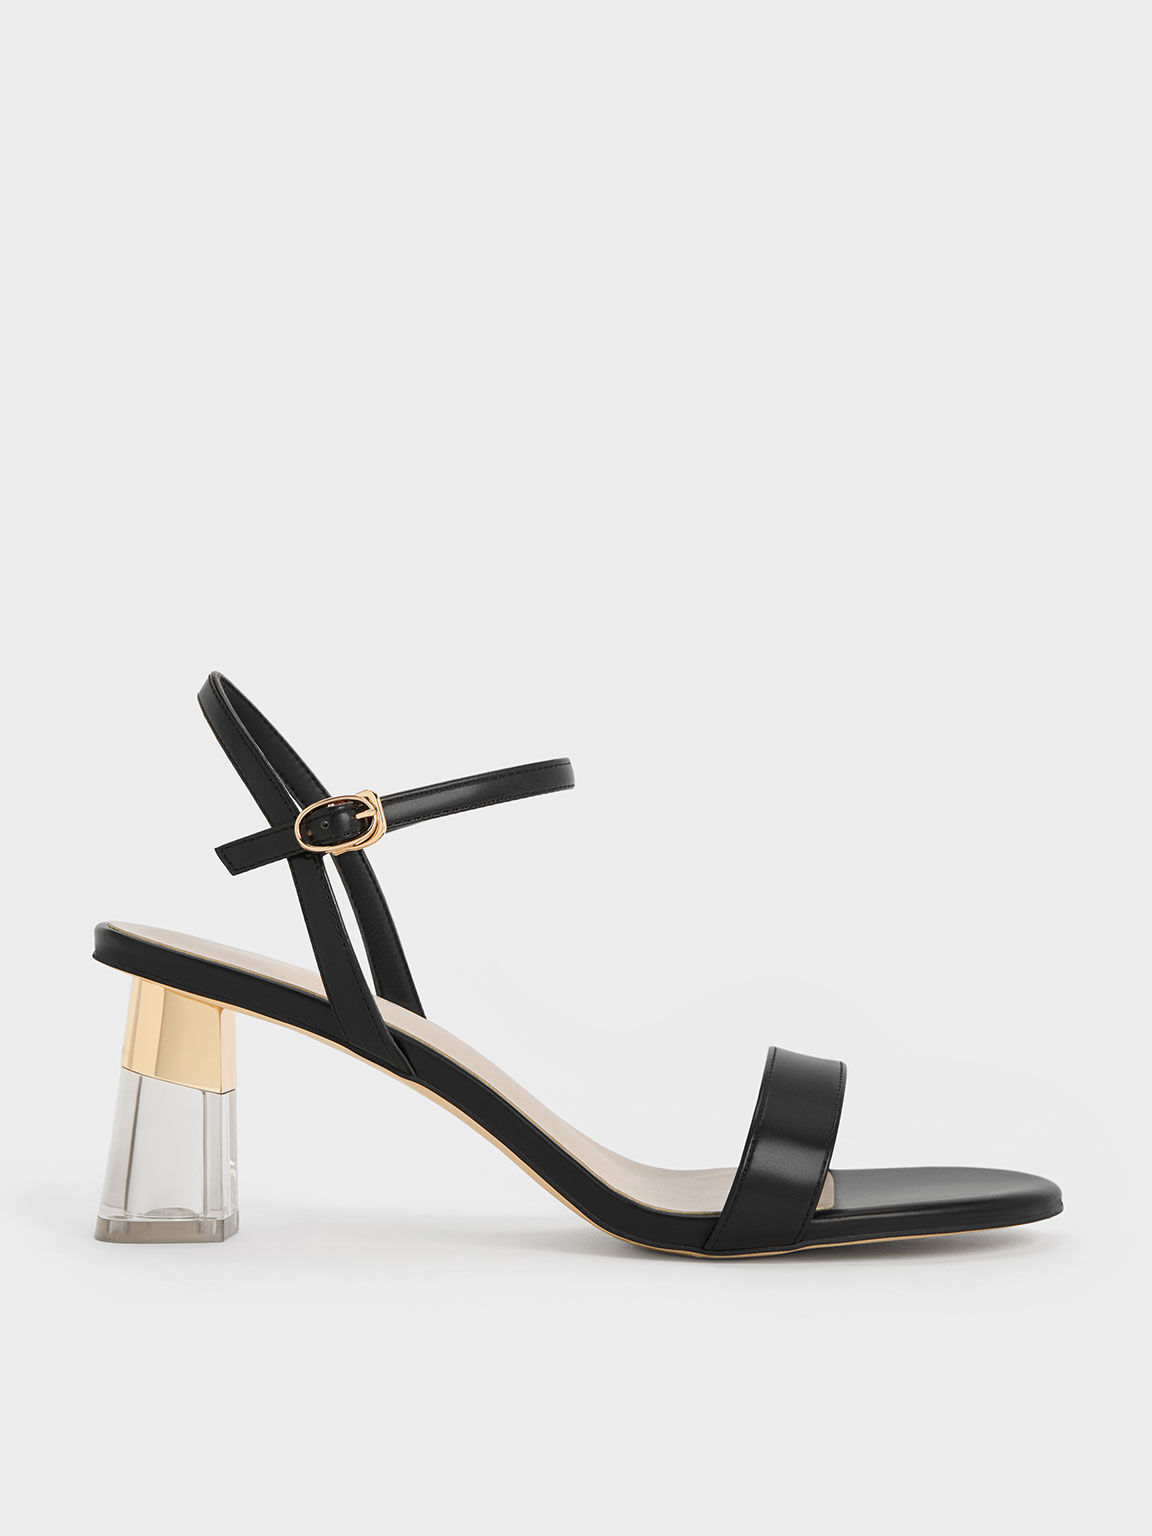 Black Ankle Strap D'Orsay Pumps | CHARLES & KEITH | Charles keith, Ankle  strap, Pumps